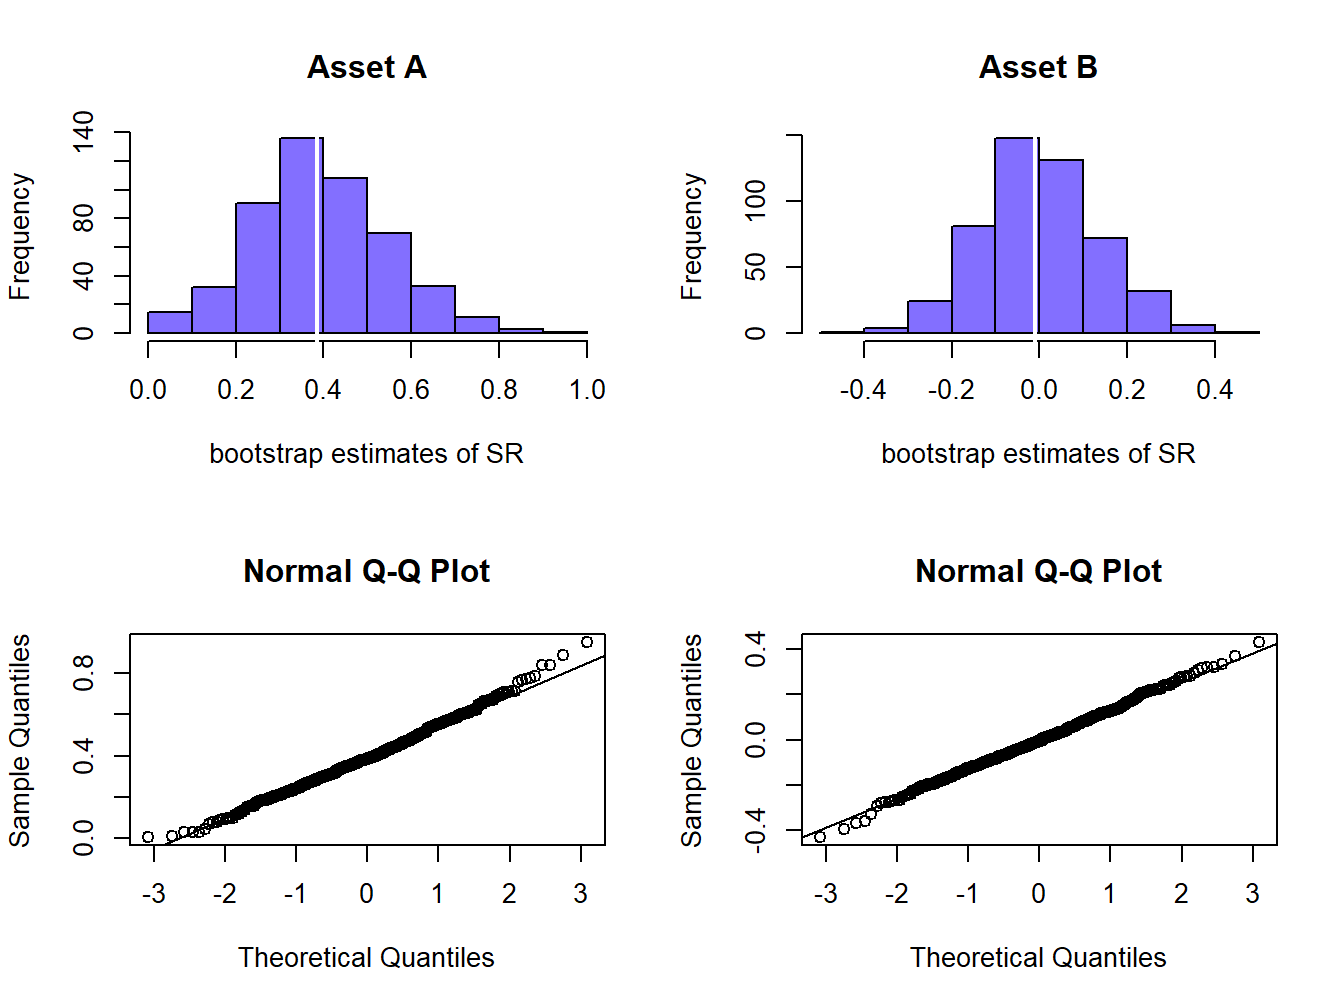 Bootstrap distributions of estimated Sharpe ratios.